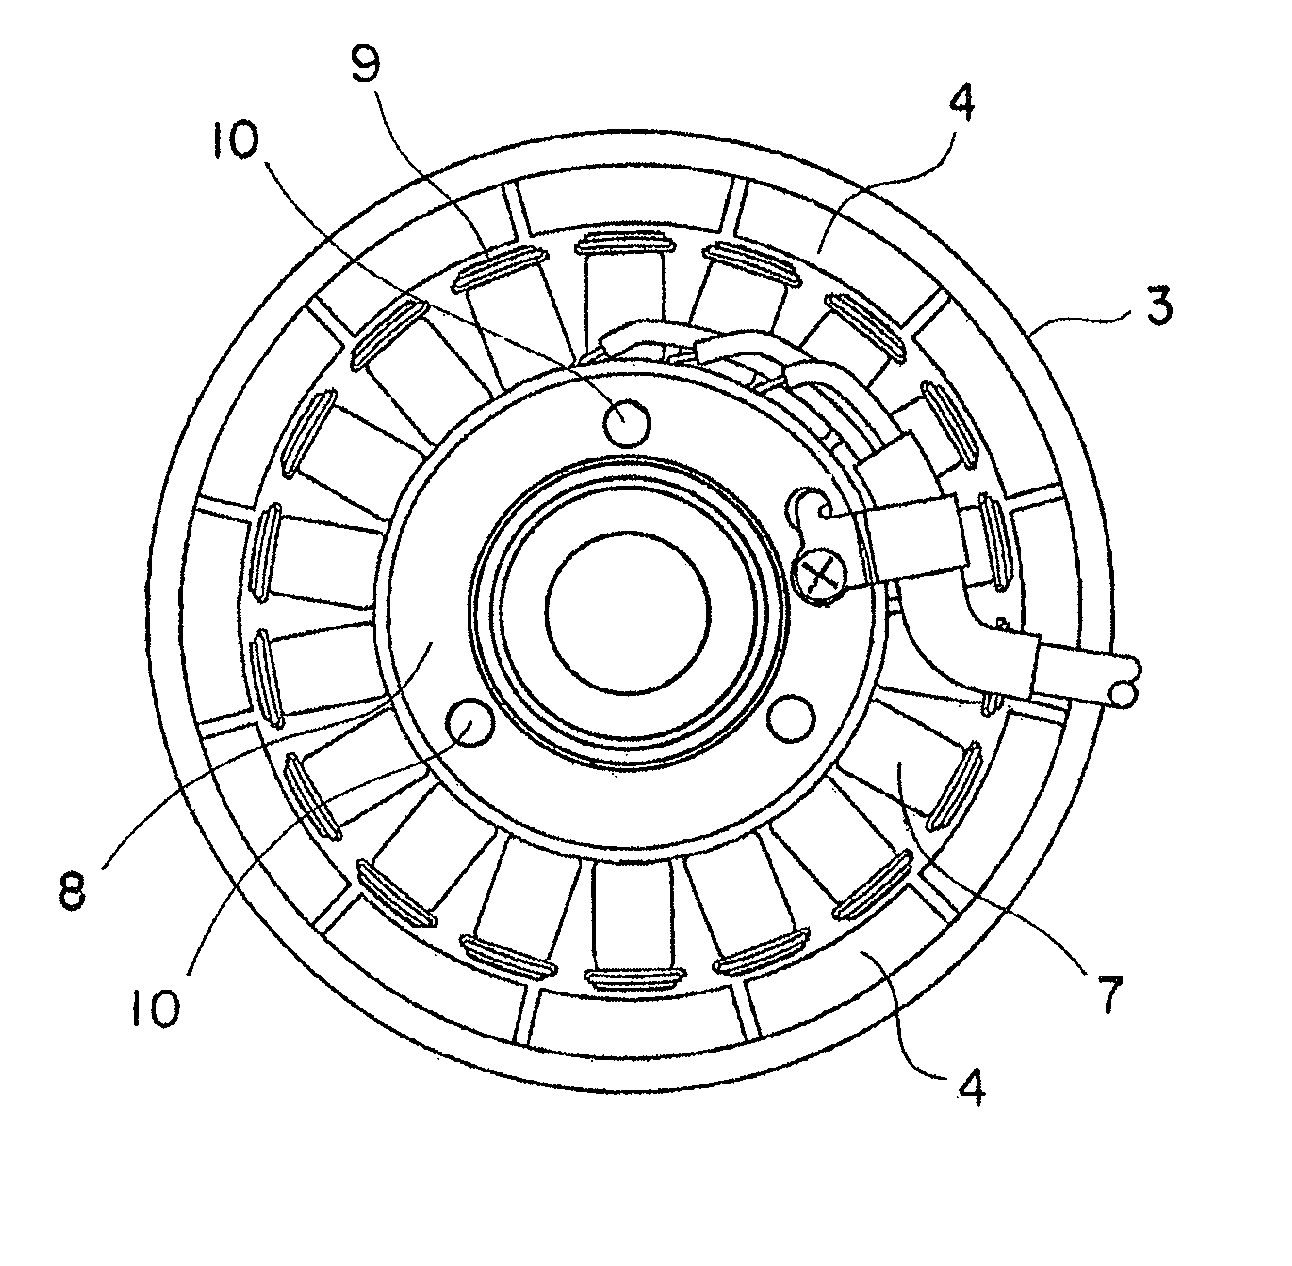 Magneto generator with multiple sets of three-phase windings